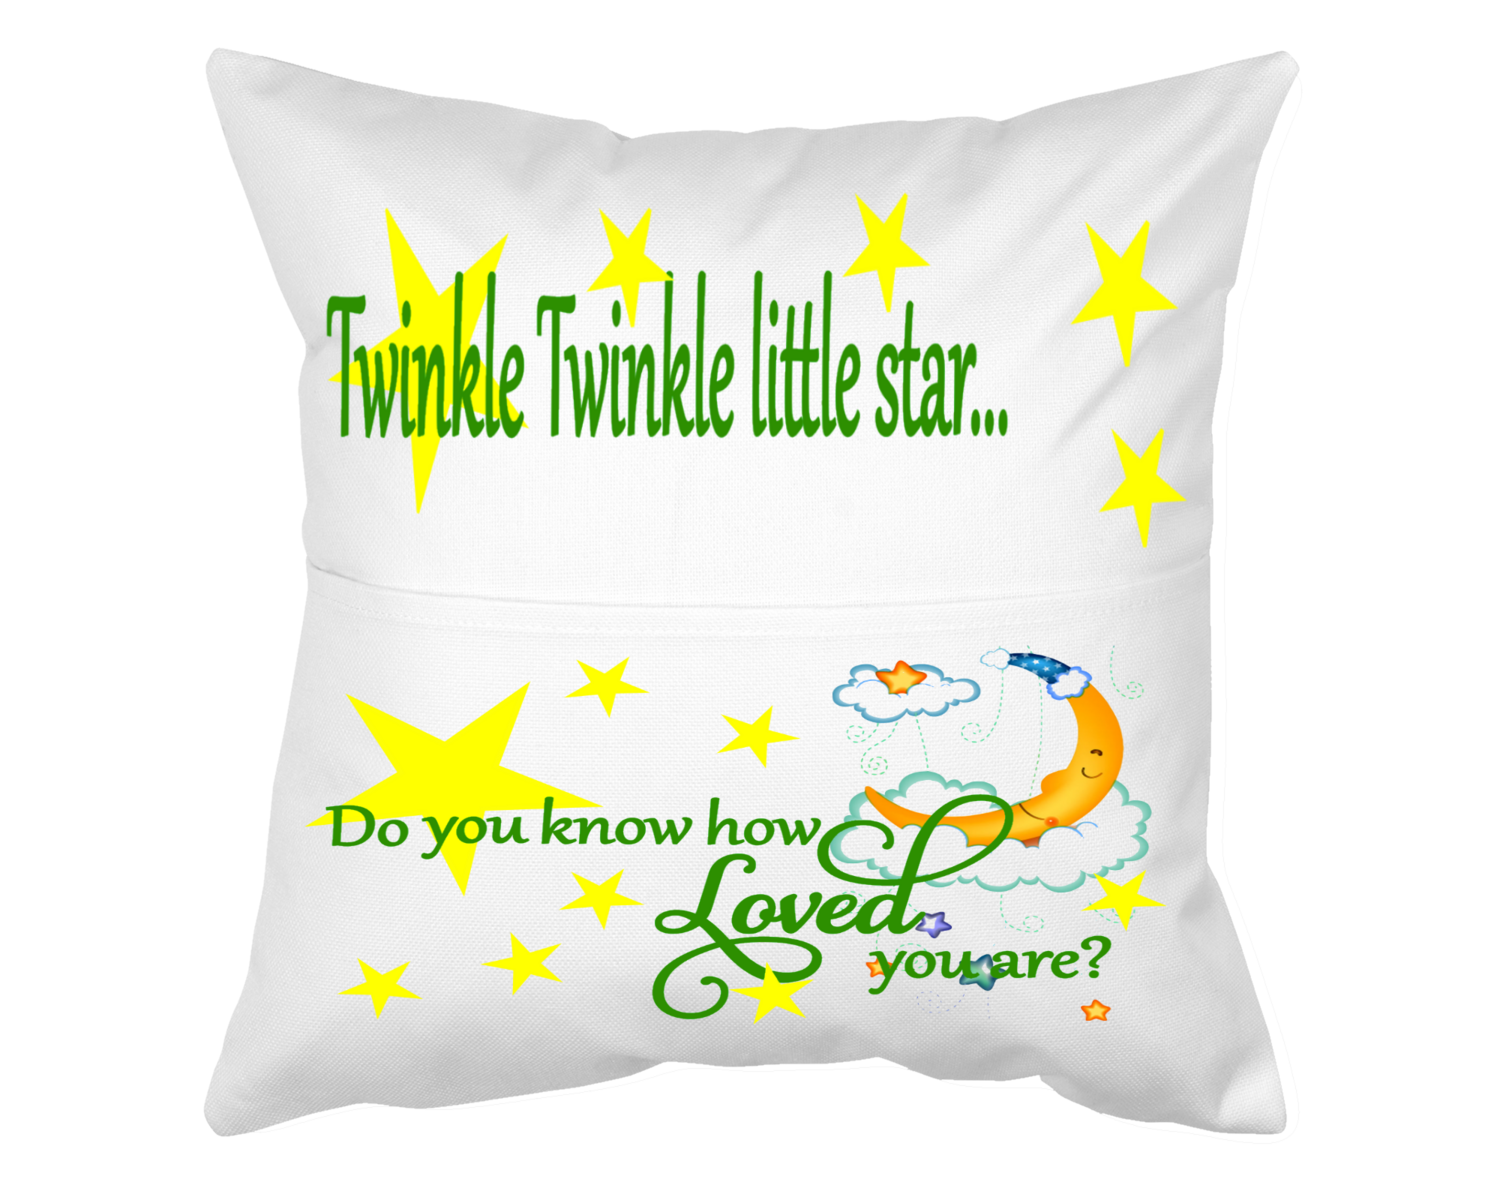 Pillow With Pocket: TWINKLE, TWINKLE LITTE STAR....DO YOU KNOW HOW LOVED YOU ARE?